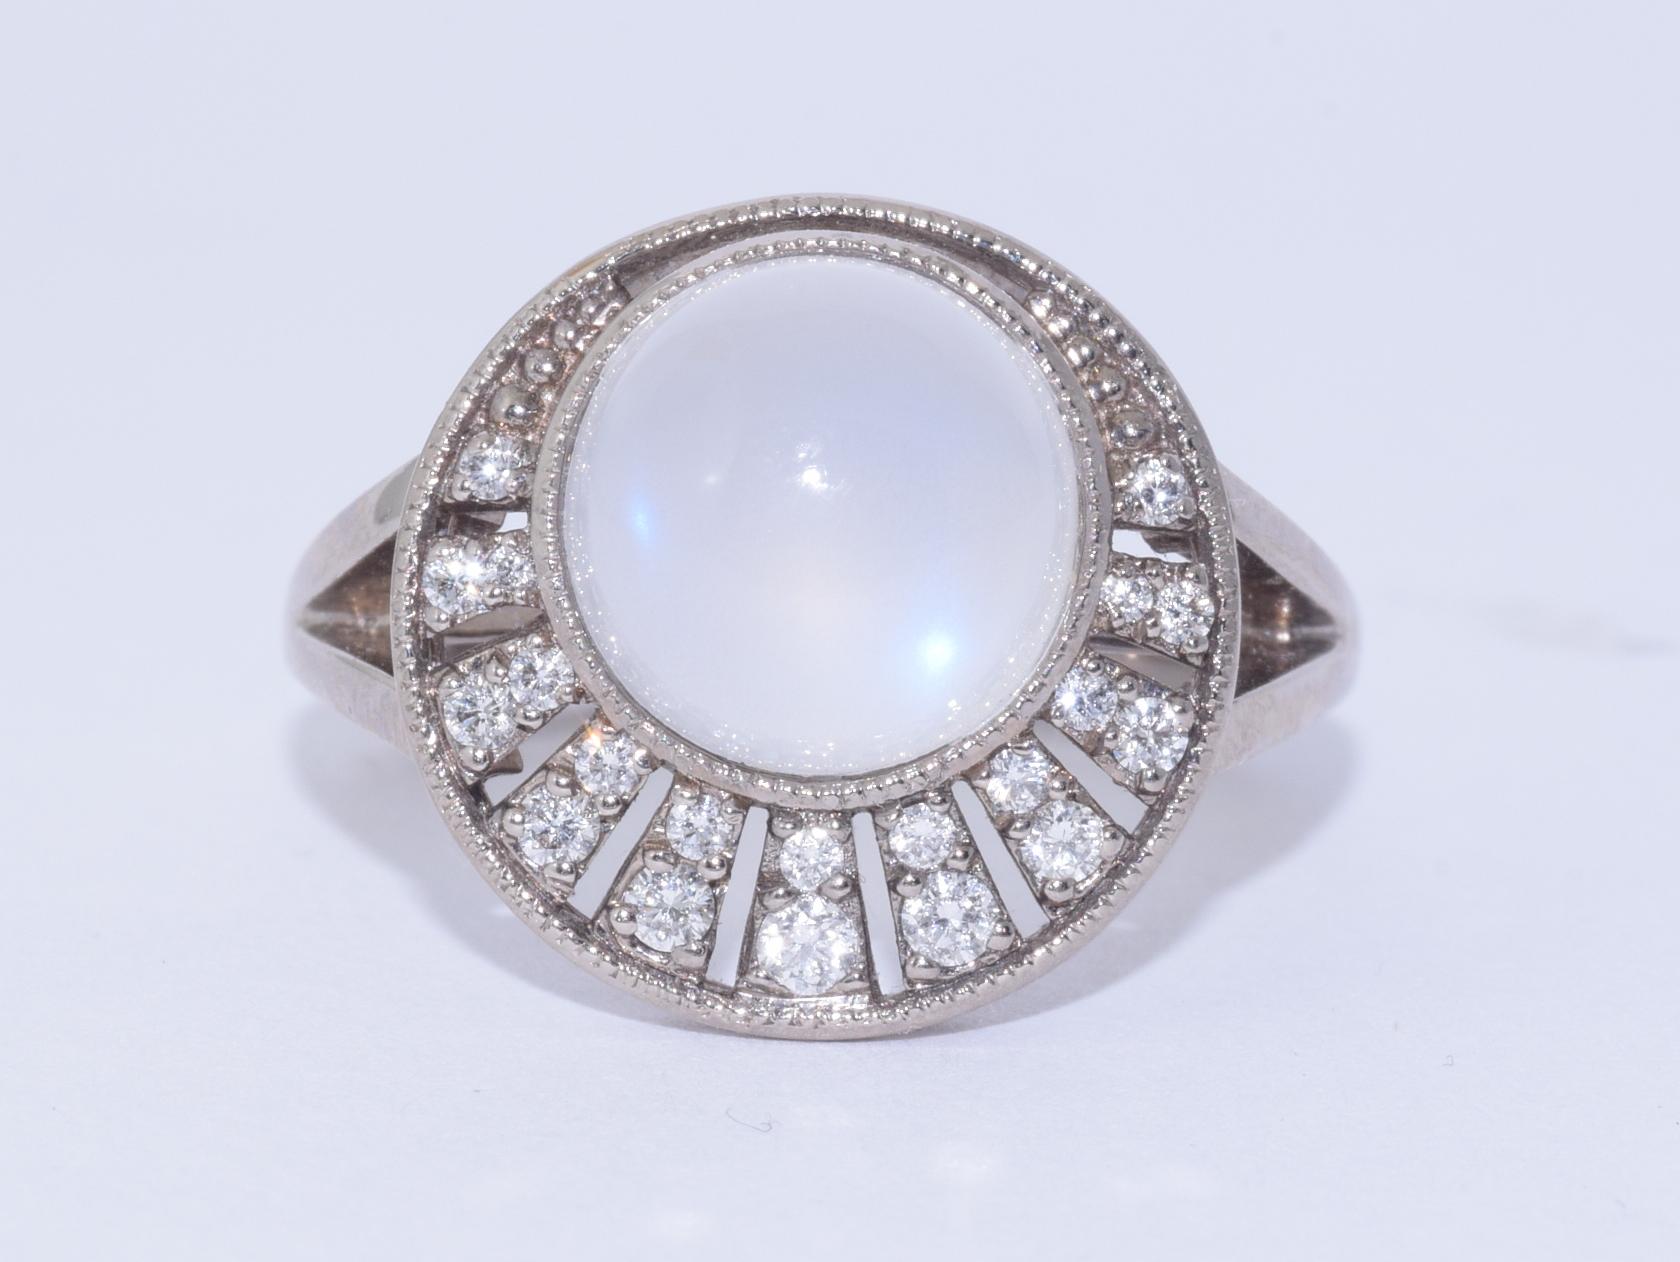 Rays of round diamonds totaling approximately 0.18 carats emanate from a round cabochon moonstone weighing 3.20 carats mounted in 18 karat white gold. Finger size 6.
Moonstone 9mm. Top of ring 15mm.

Fred Leighton is renowned for extraordinary